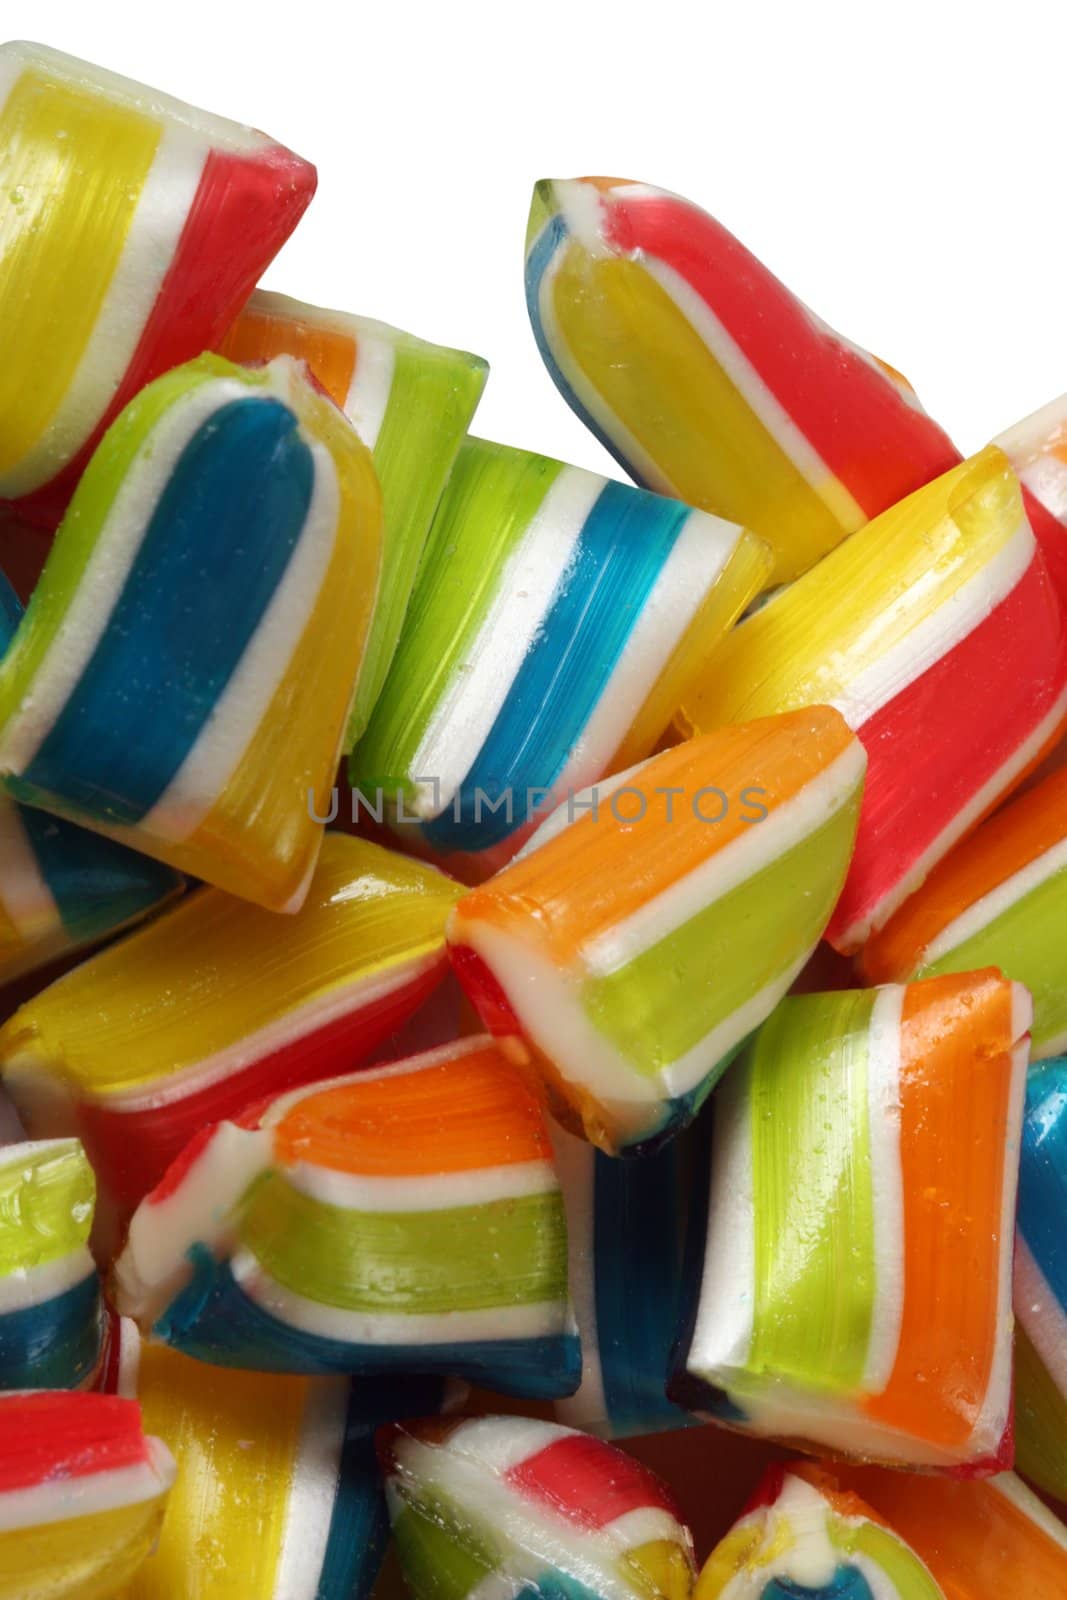 Close-up image of handmade and colorful candies